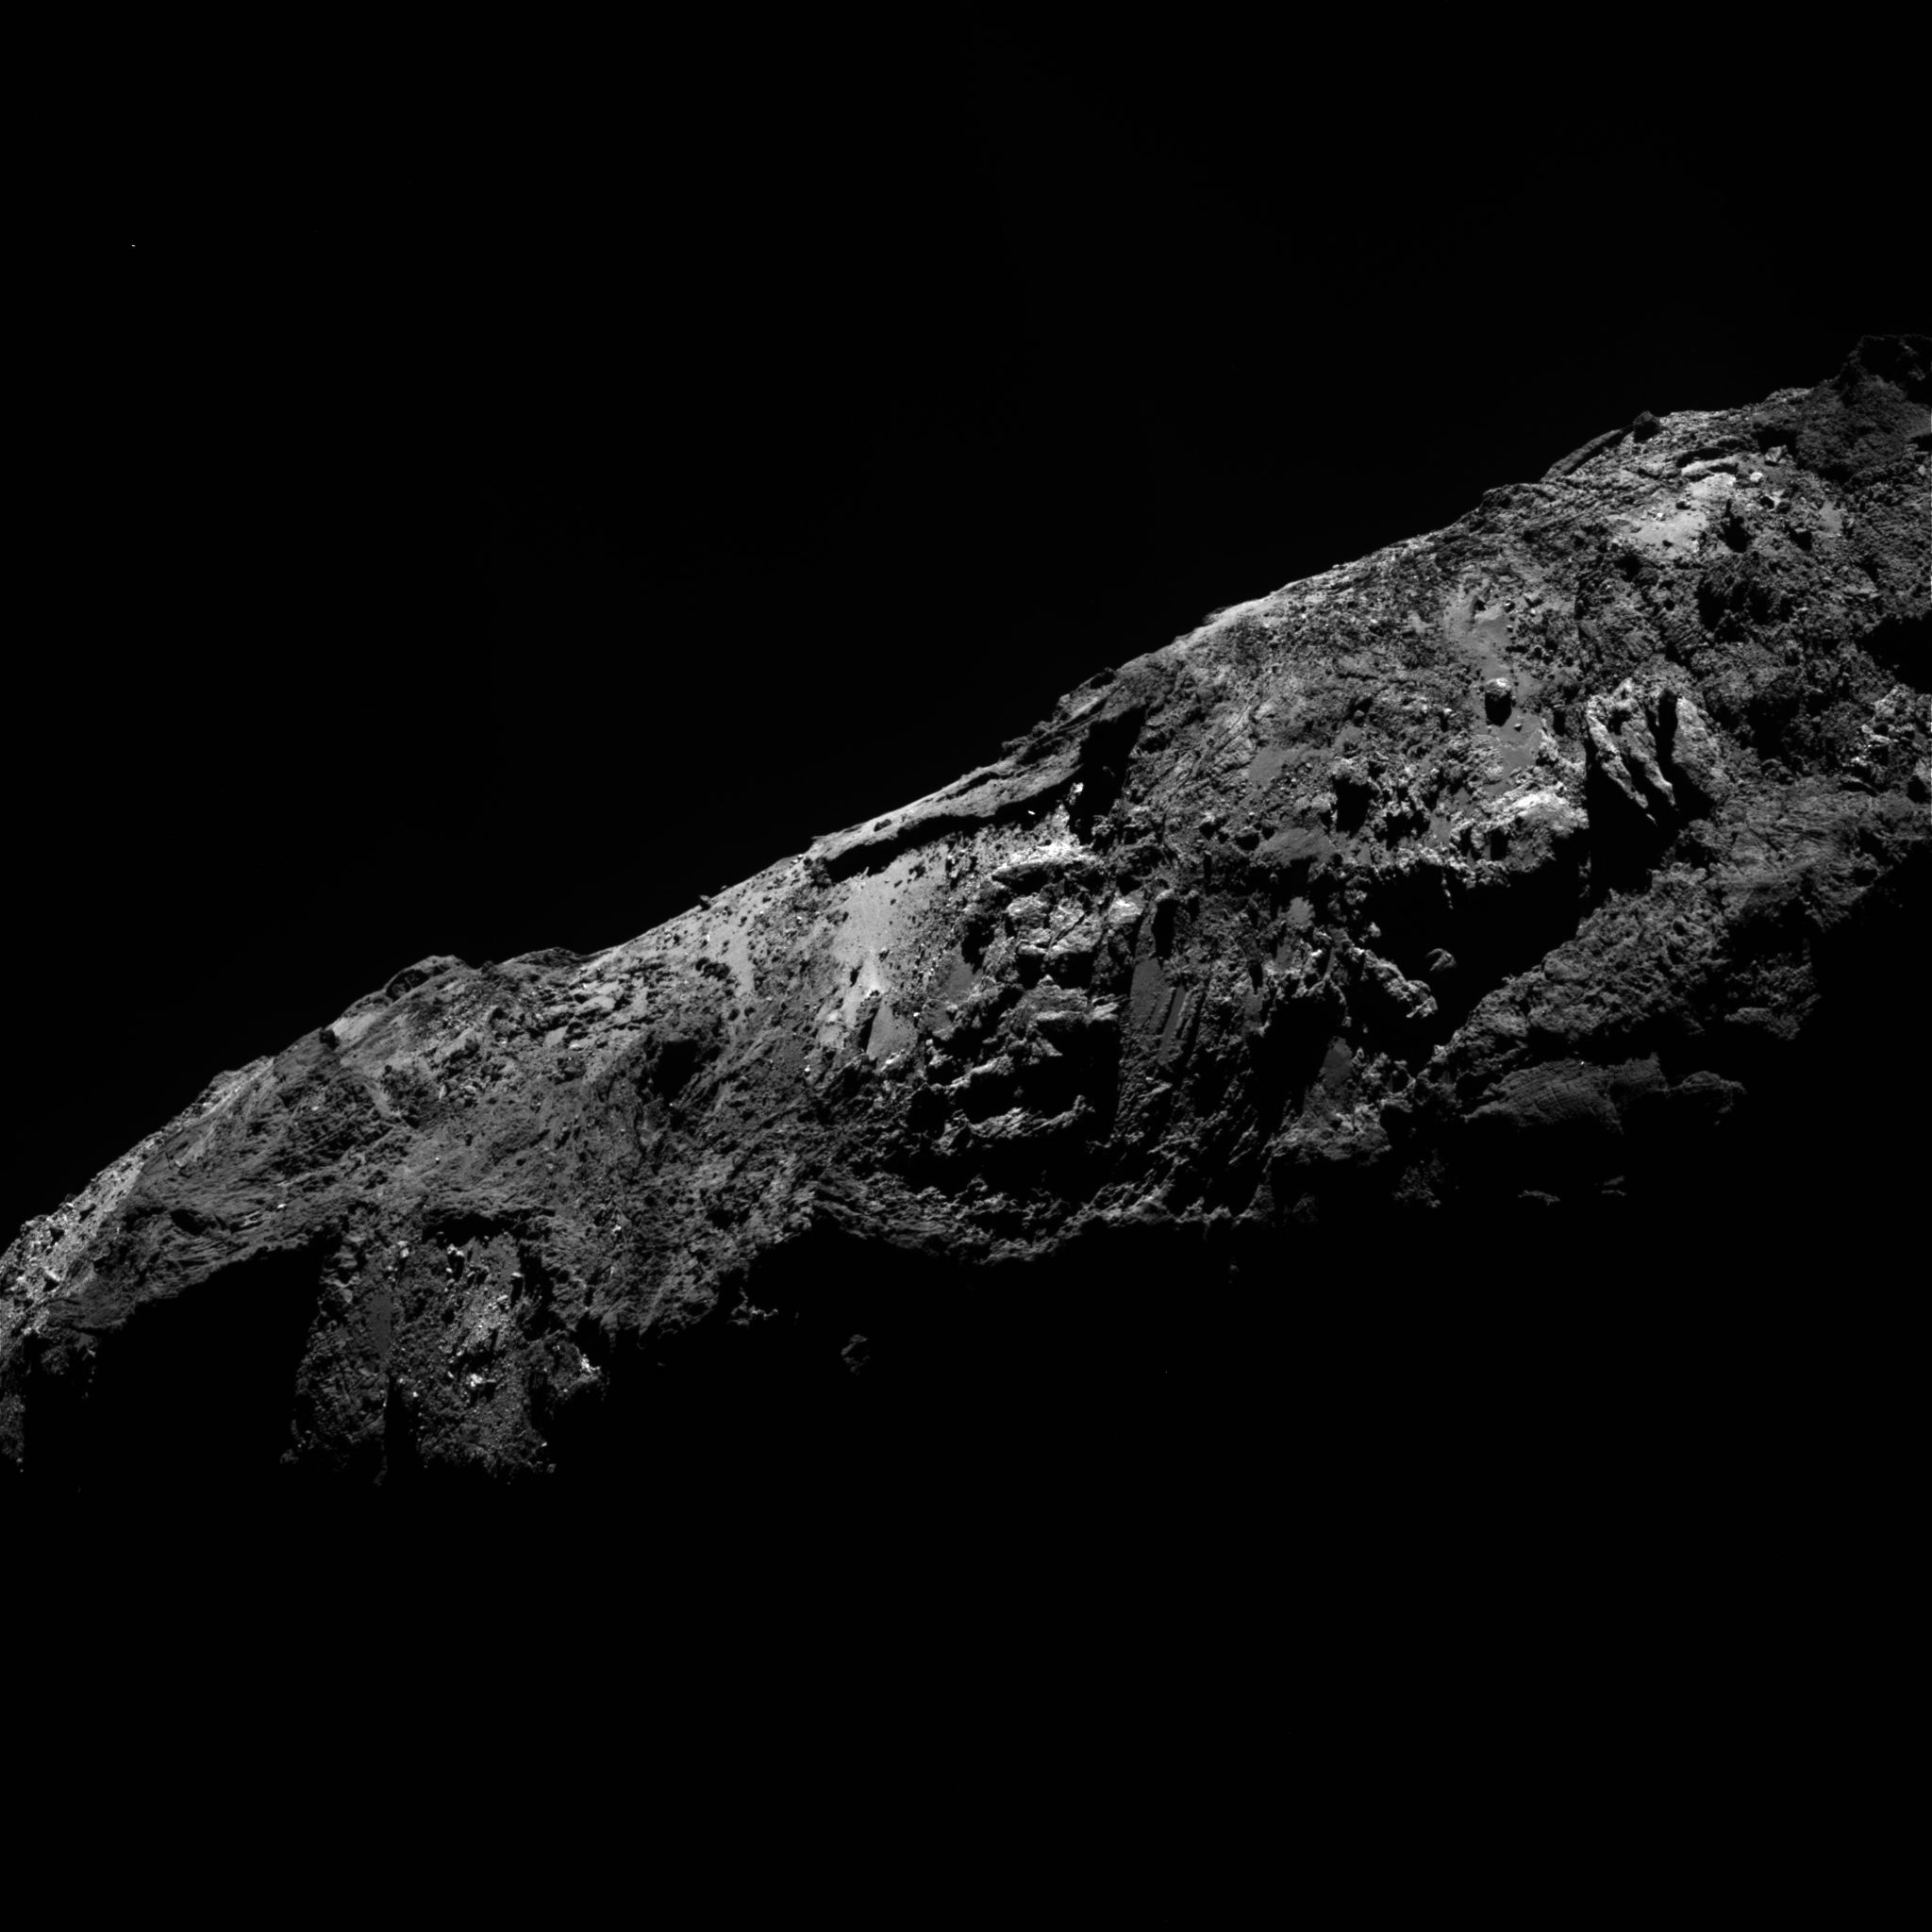 The ESA’s Latest Image From Rosetta Shows Off A Rugged Surface 